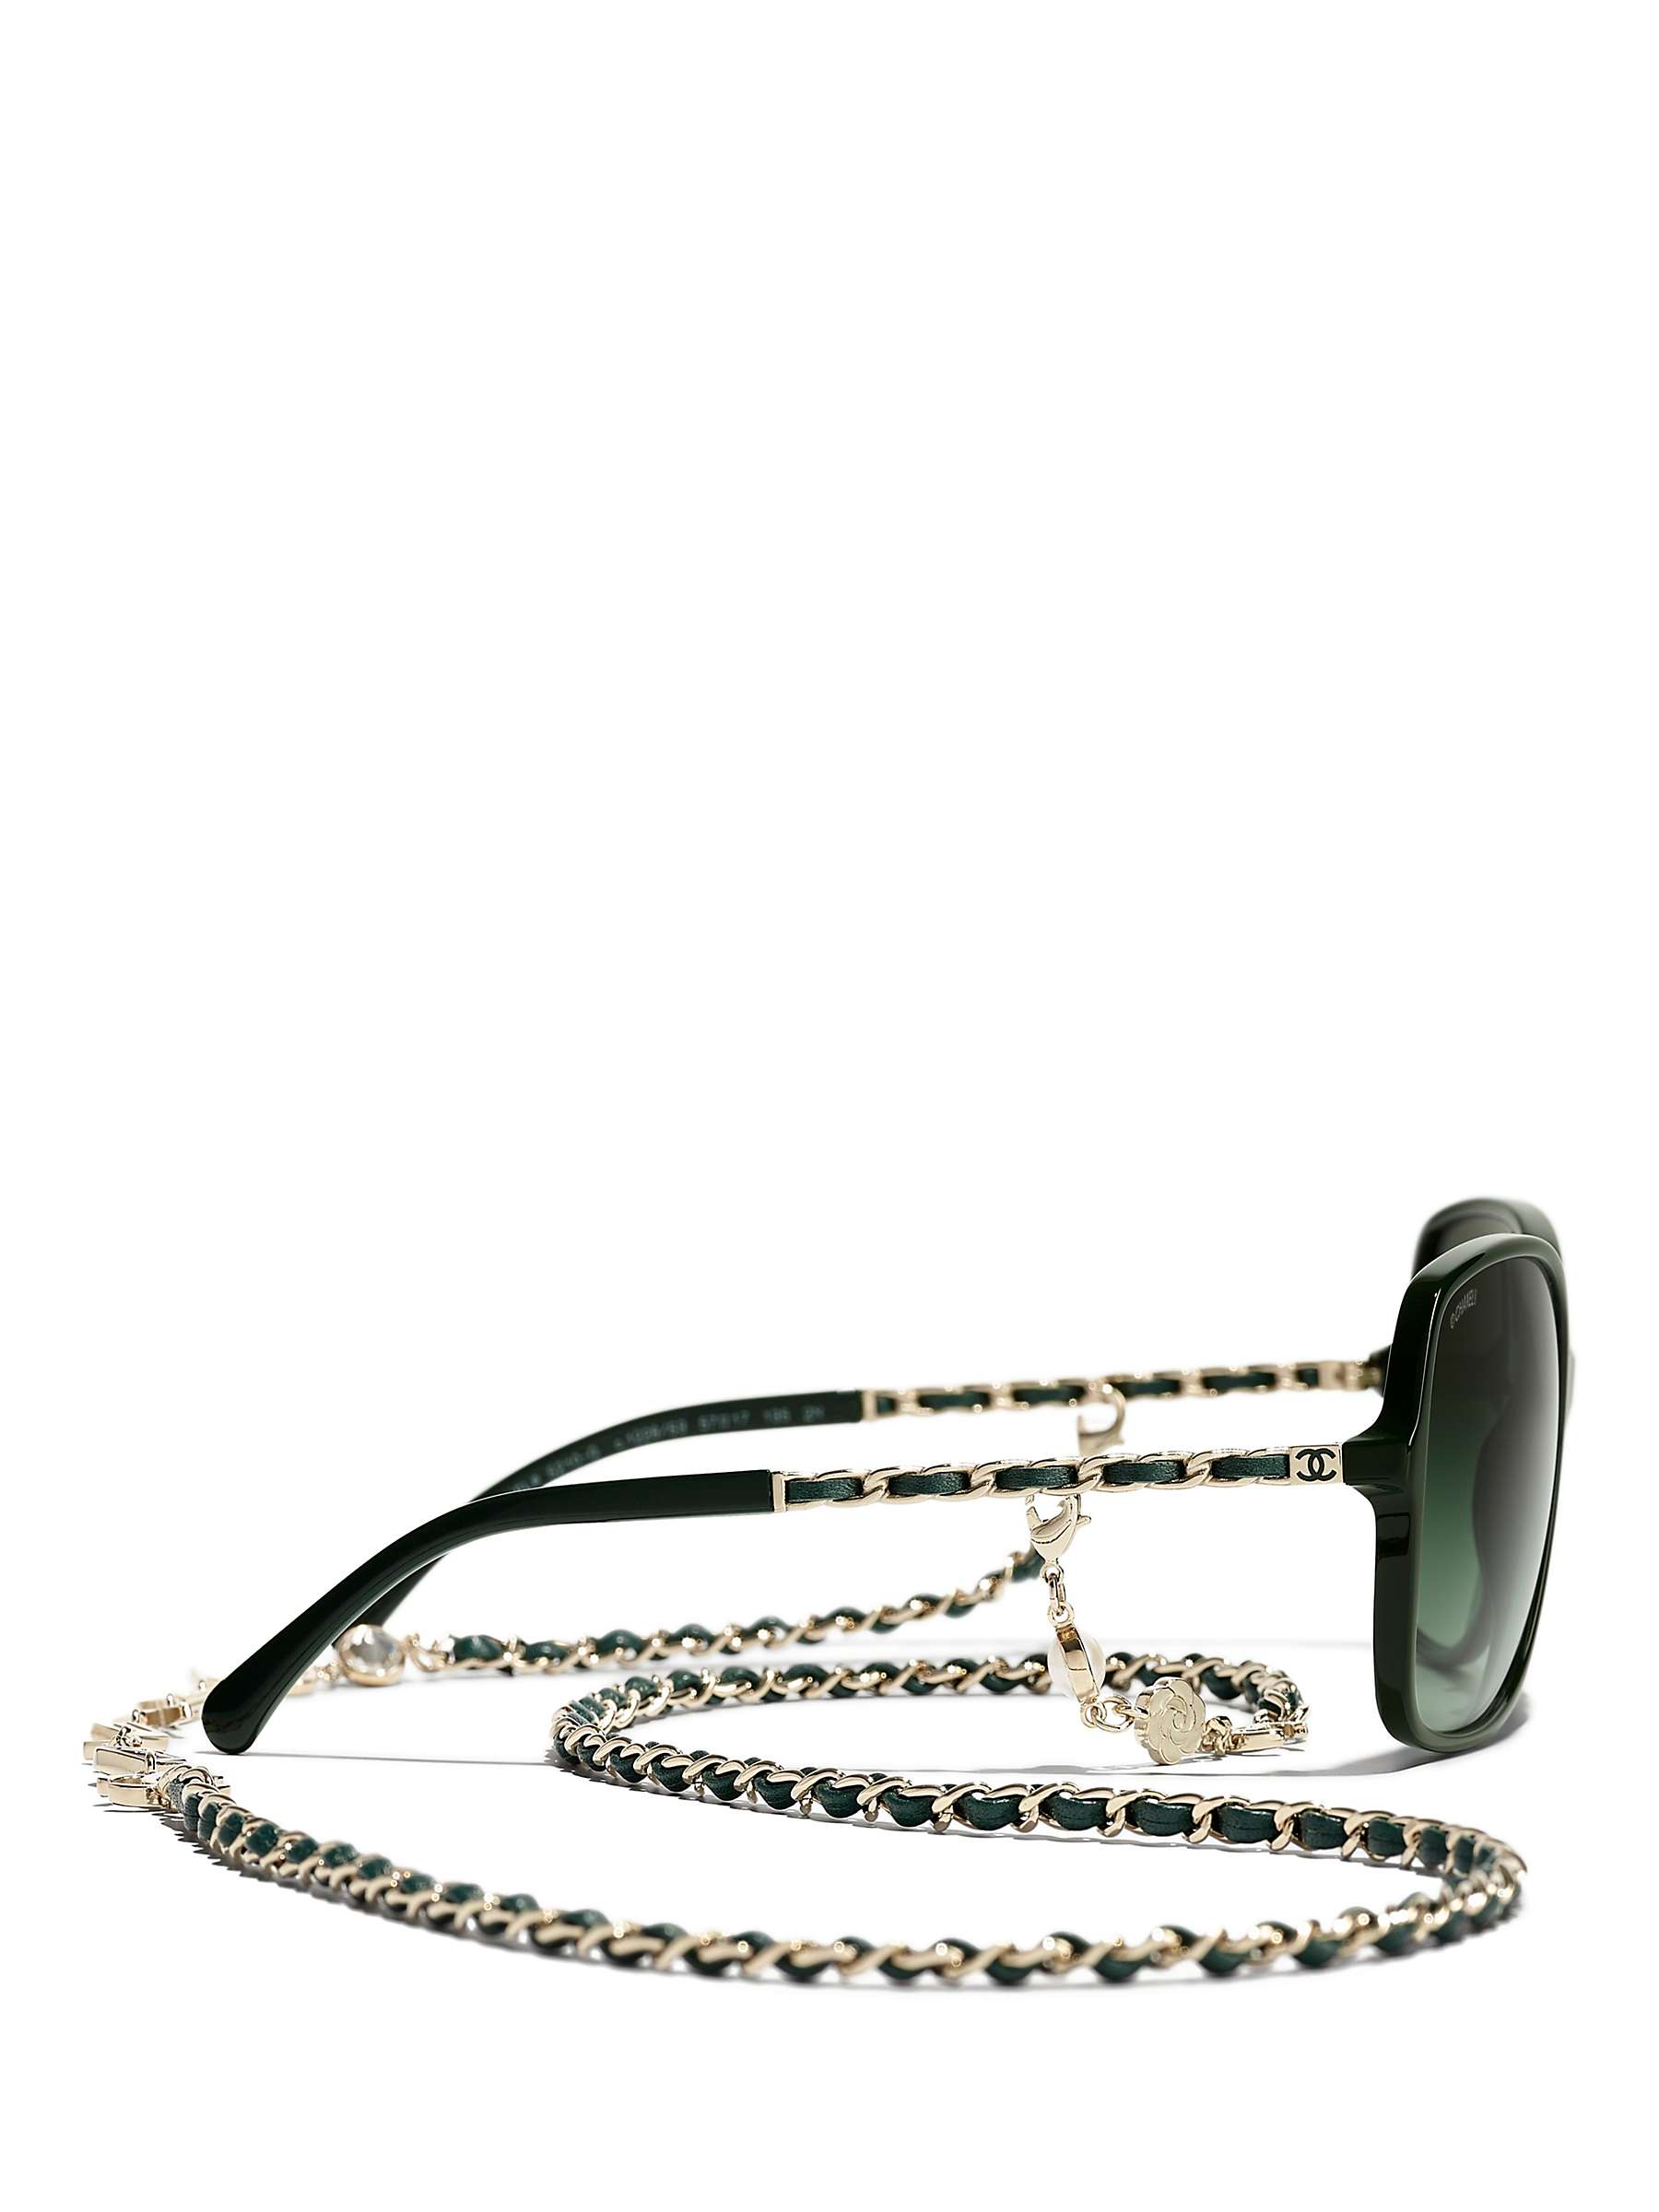 Buy CHANEL Square Sunglasses CH5210Q Green Online at johnlewis.com